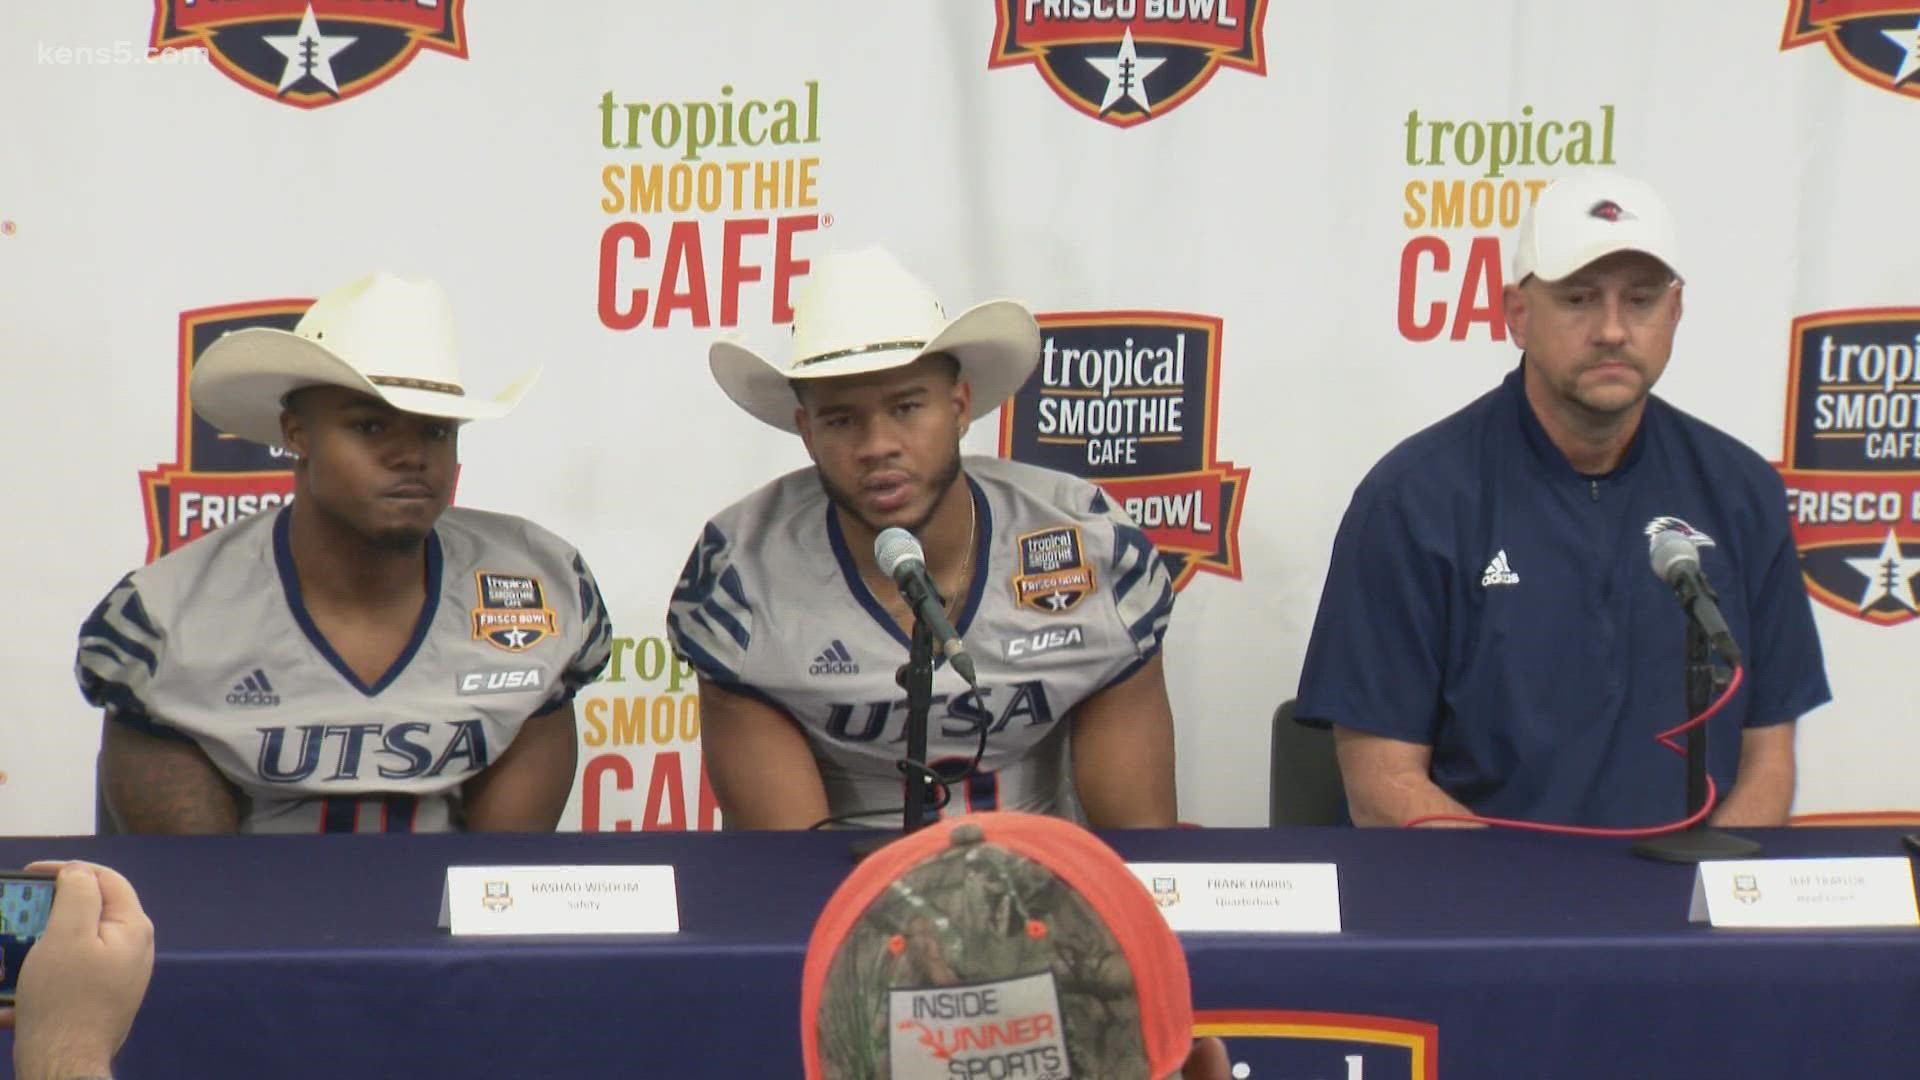 Day 4: Final press conference before Tropical Smoothie Cafe Frisco Bowl